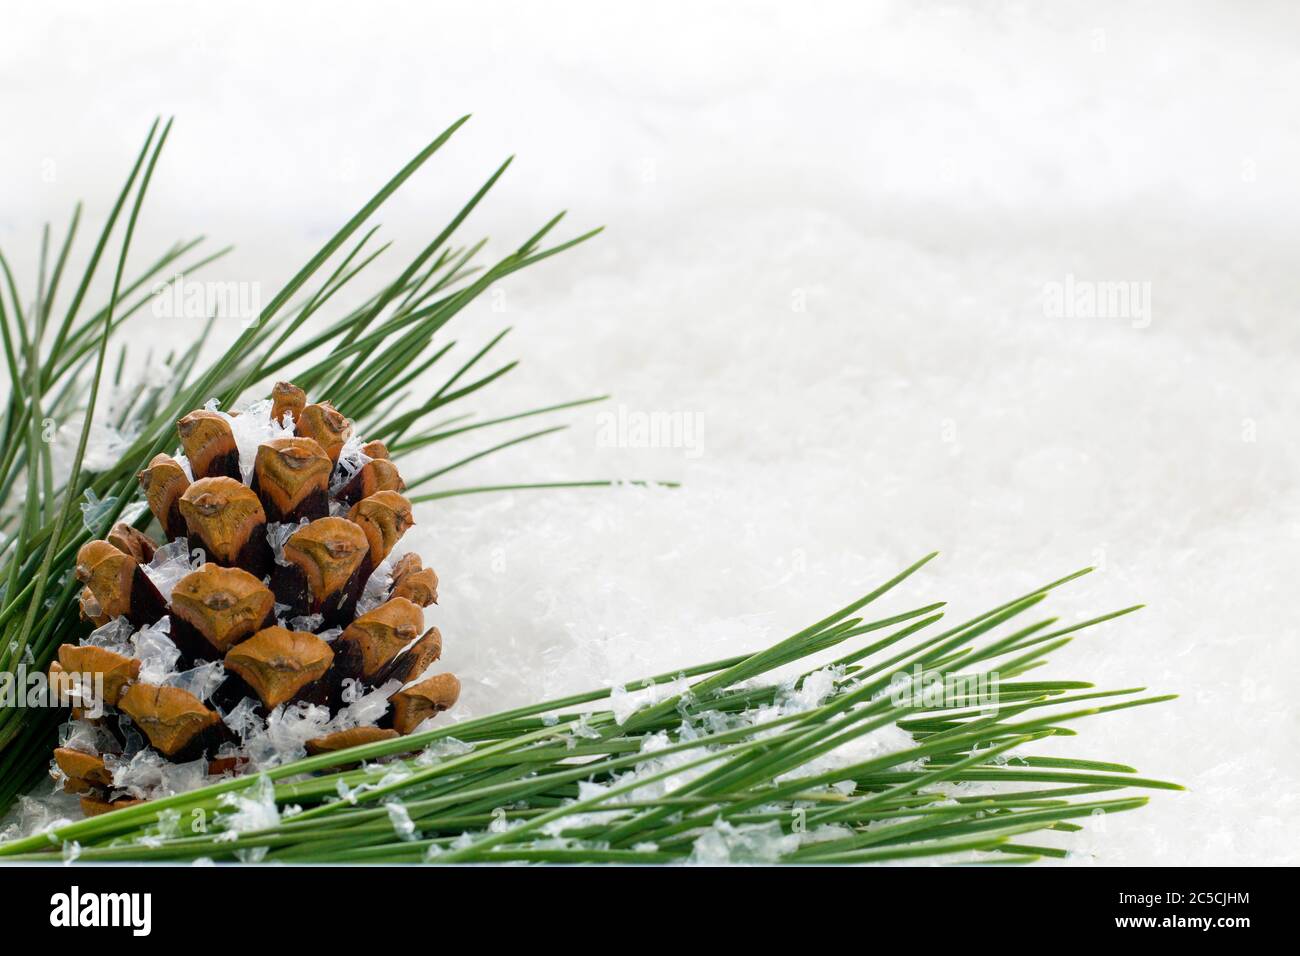 Fir cone with green foliage sprinkled with snow flakes with copy space to add a custom message Stock Photo